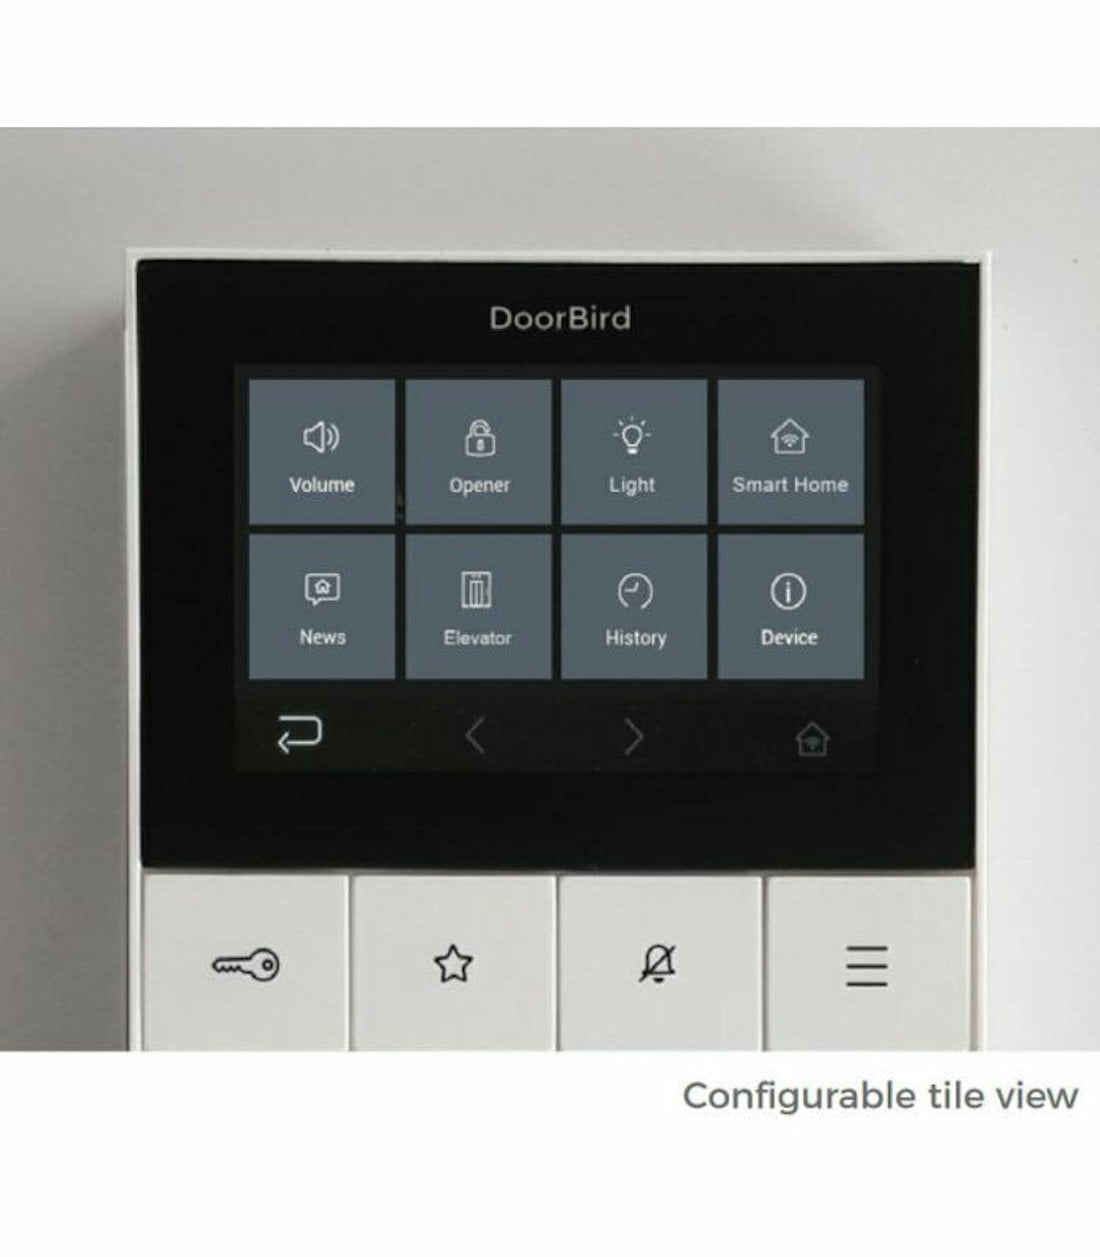 DoorBird A1101 IP Video Indoor Station for Door Communication in Single Family Residences and Apartment Buildings Configuration